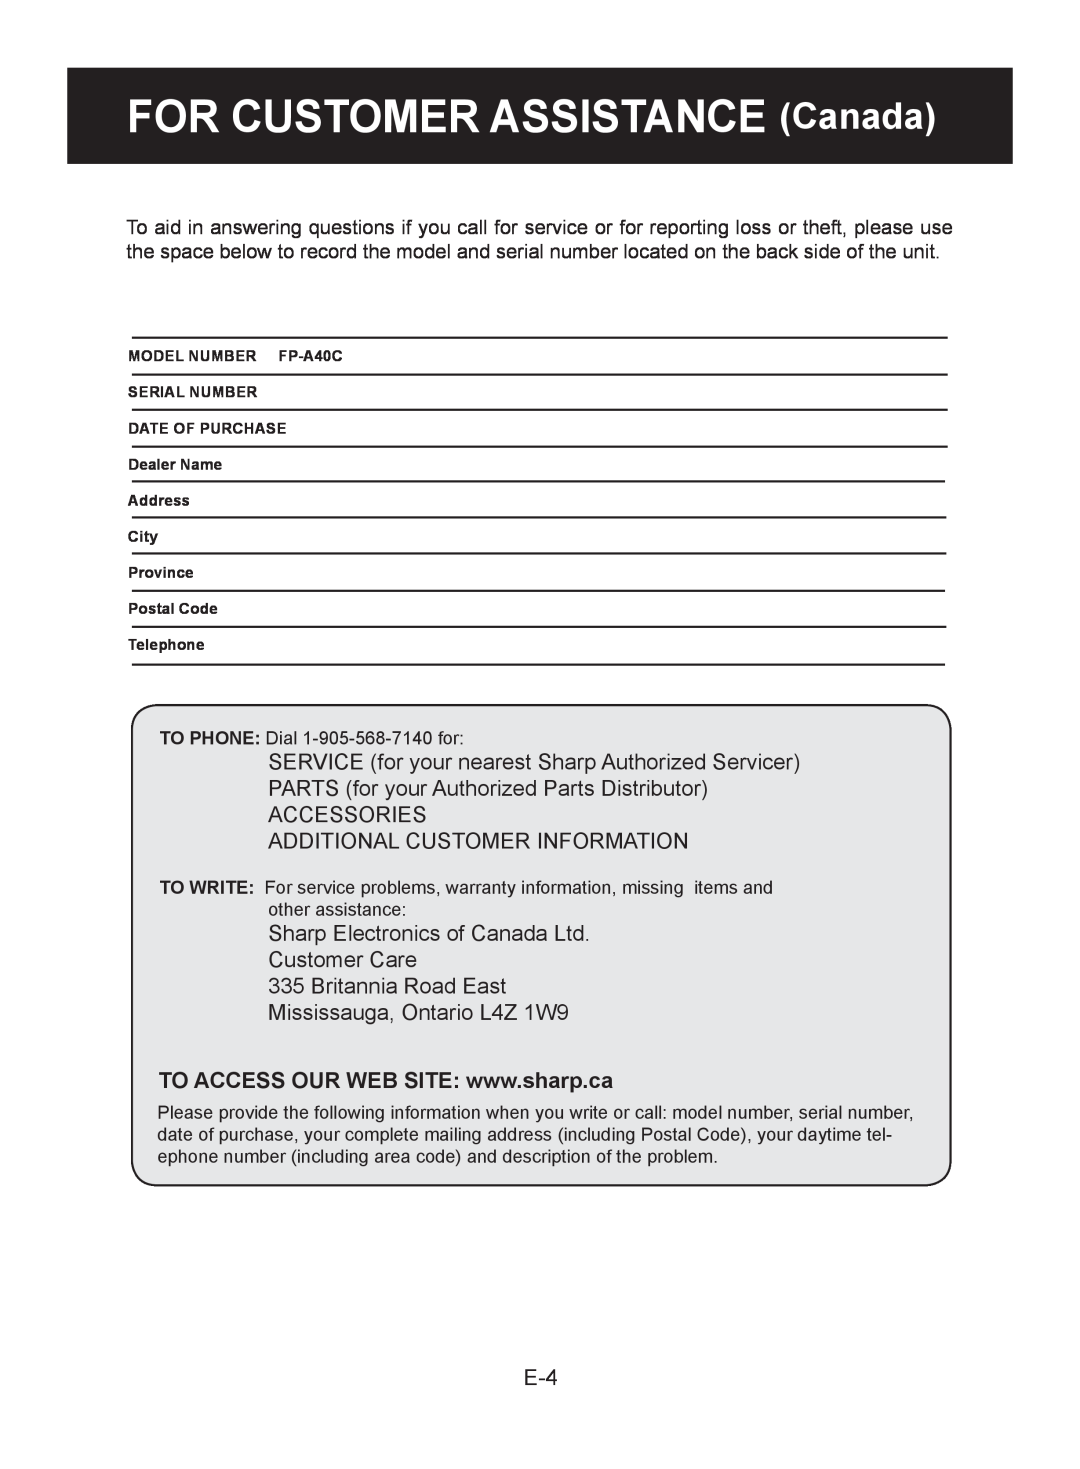 Sharp FP-A40UW, FP-A40C operation manual FOR CUSTOMER ASSISTANCE Canada, Britannia Road East, Mississauga, Ontario L4Z 1W9 